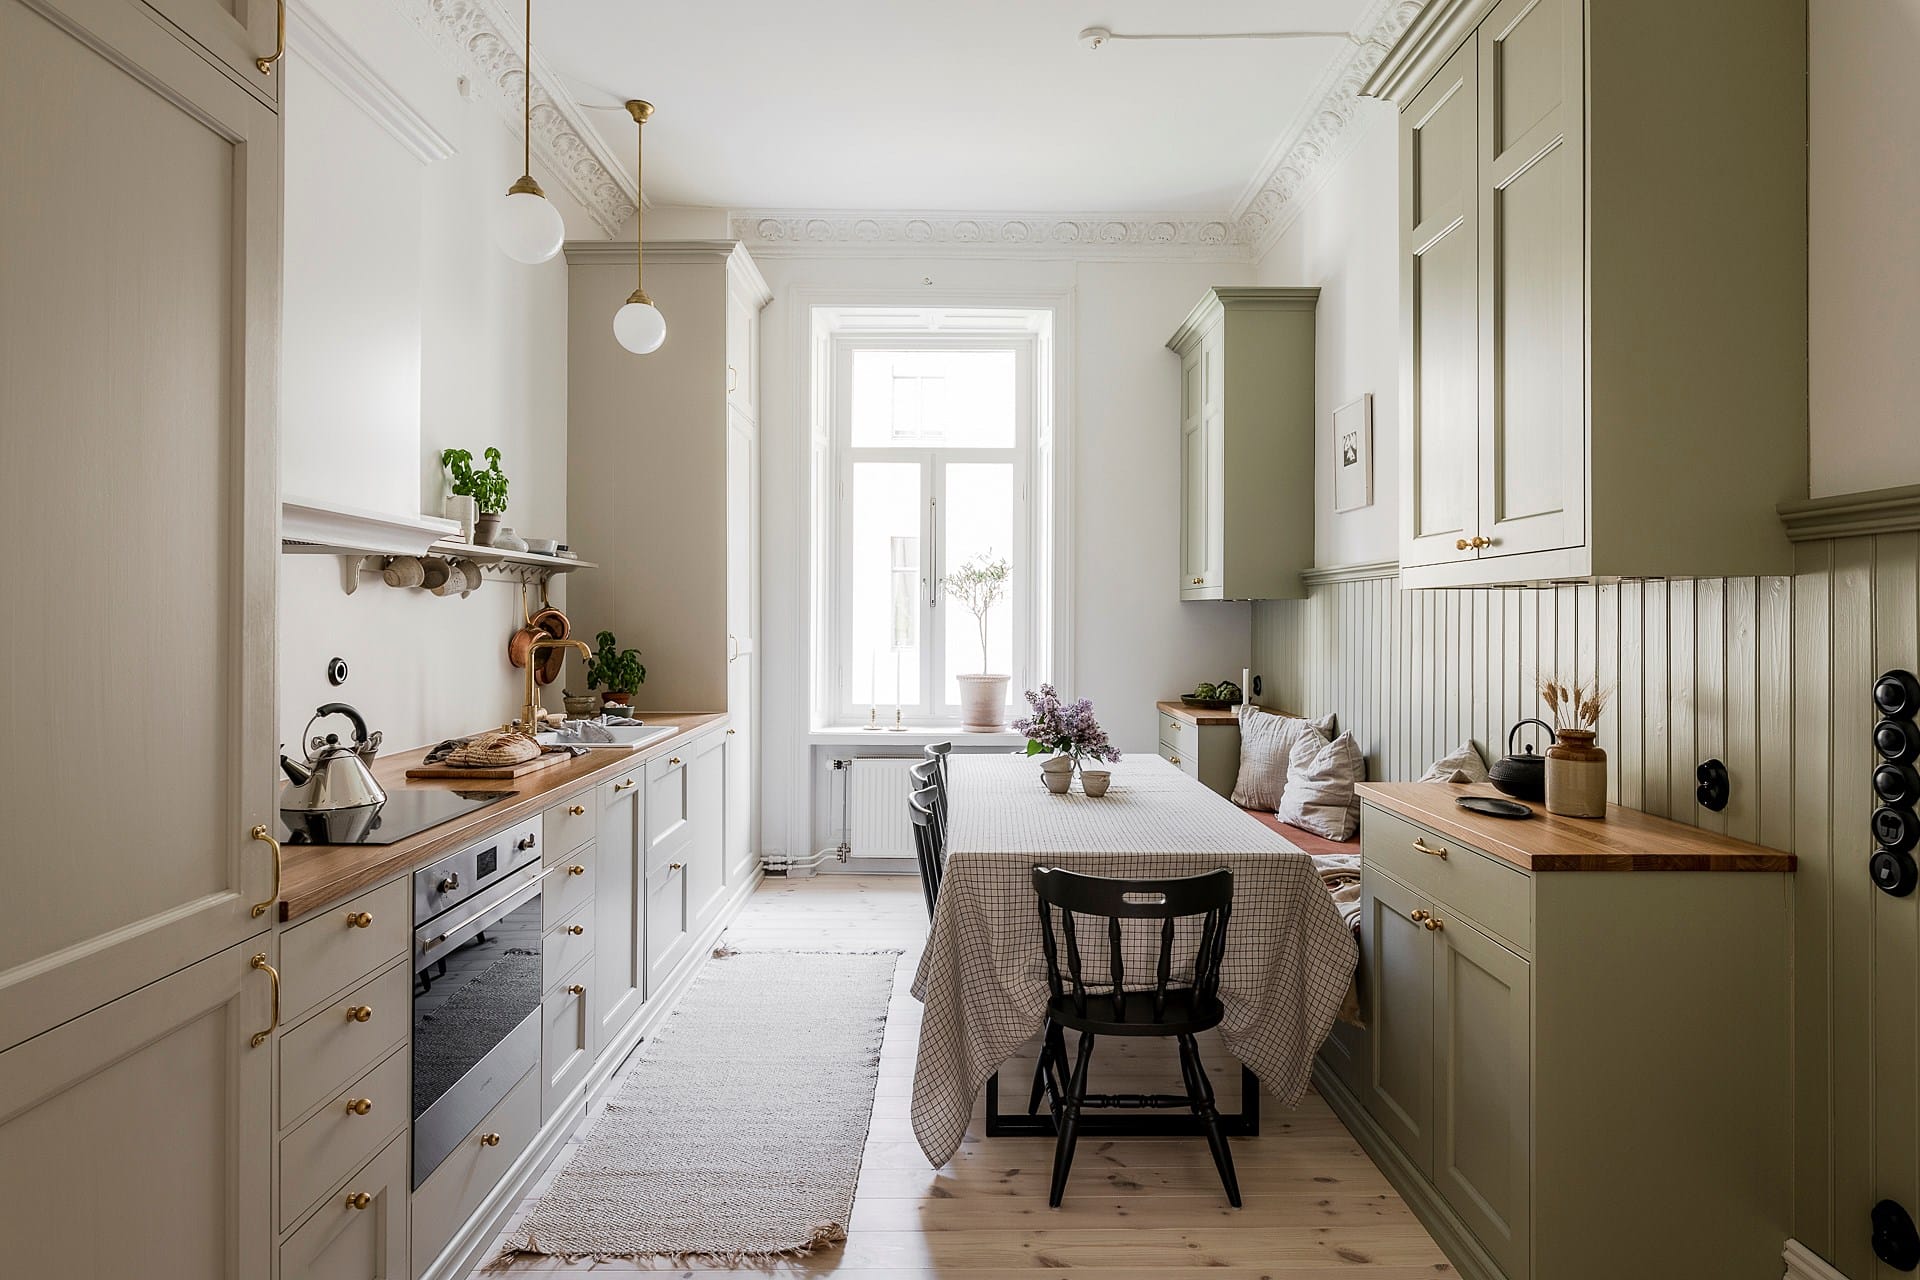 Home with an inviting shaker kitchen - COCO LAPINE DESIGNCOCO LAPINE DESIGN